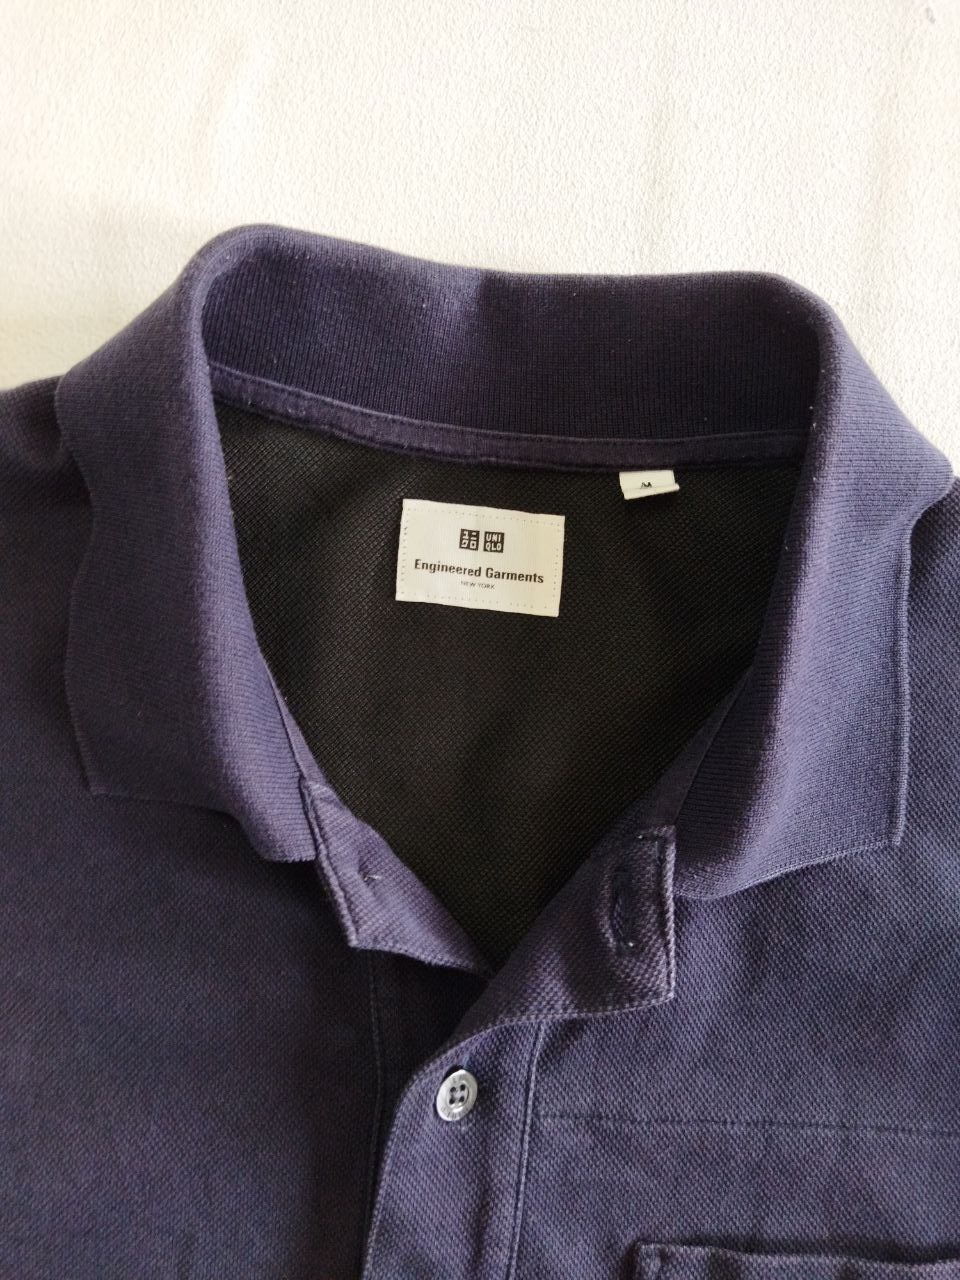 Best Offer🔥Engineered Garments X Uniqlo Polo Shirt - 3